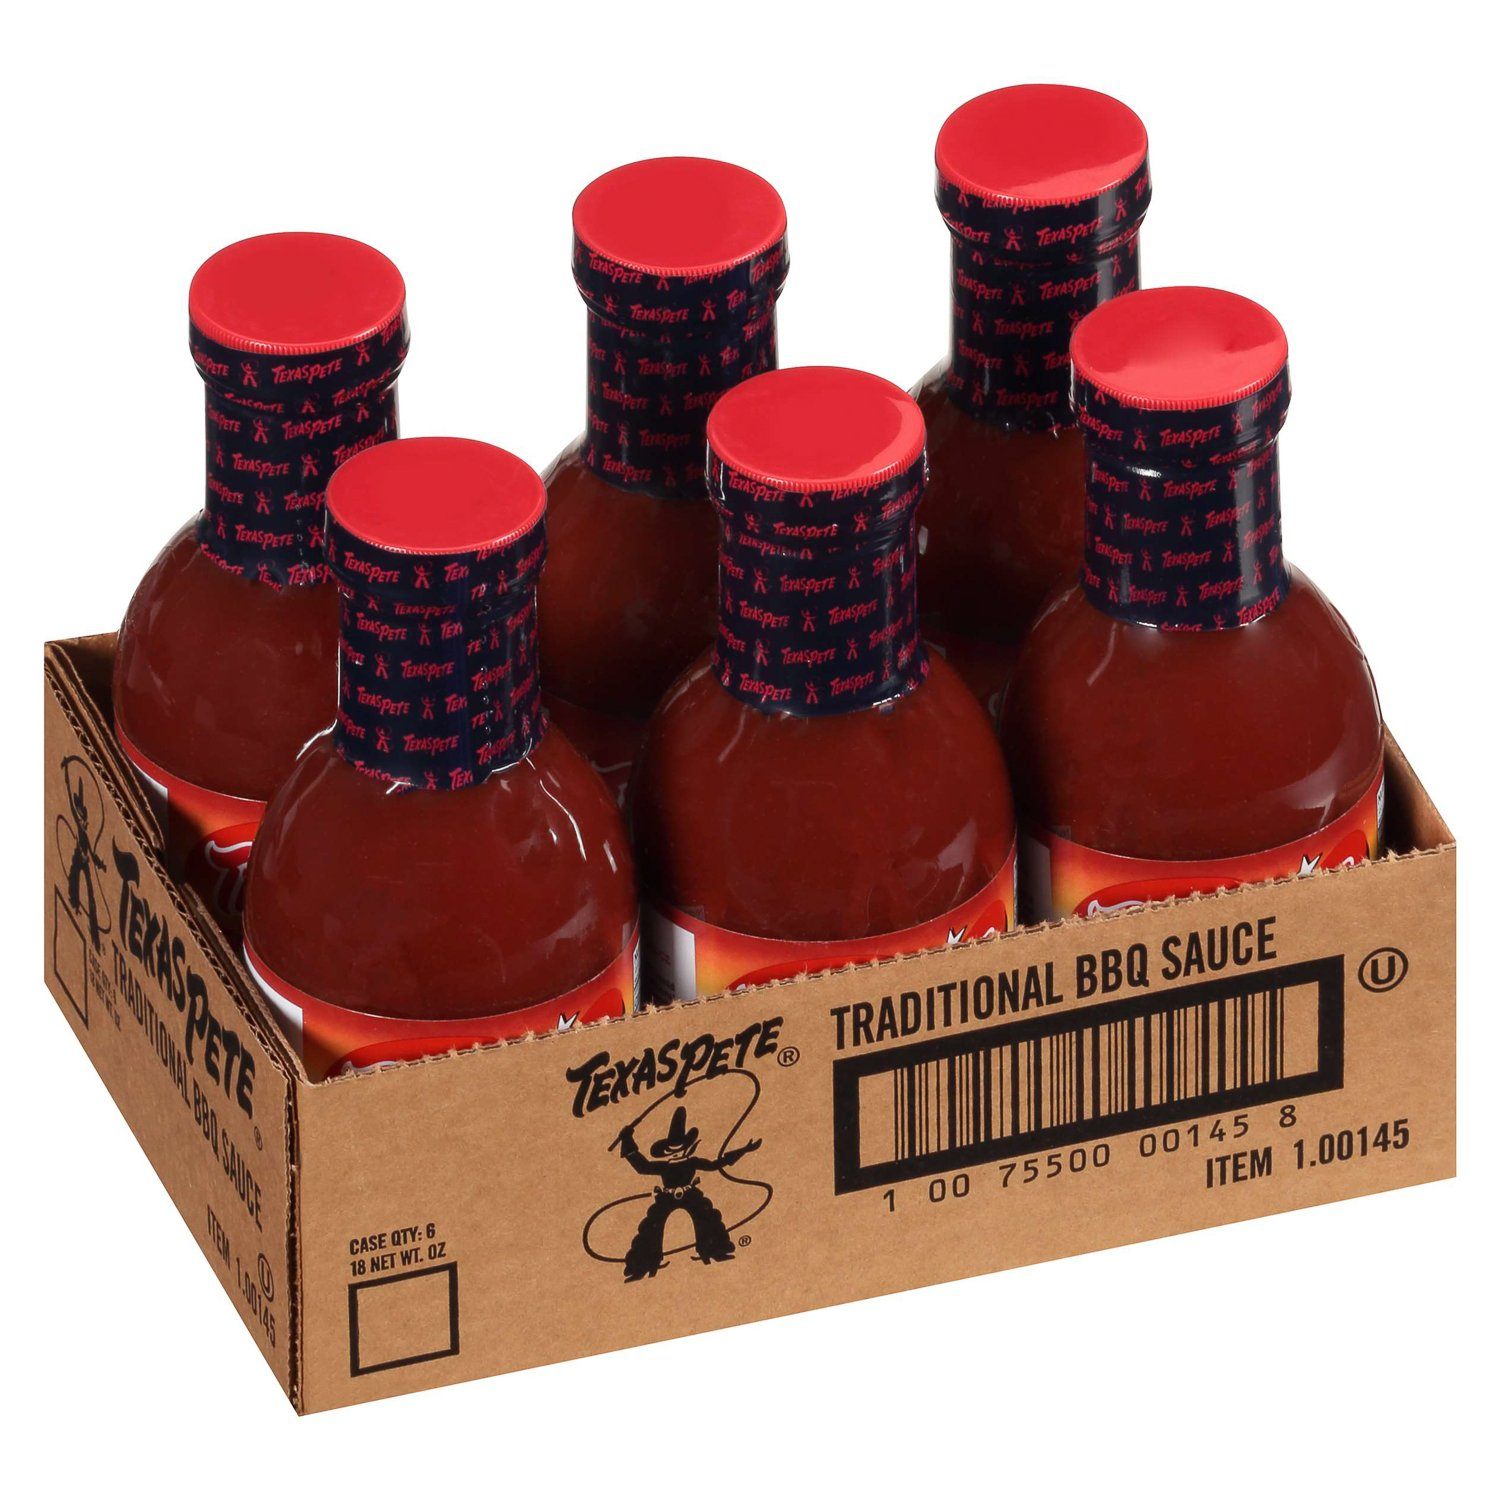 Texas Pete BBQ Sauce Texas Pete Traditional 16 Oz-6 Count 